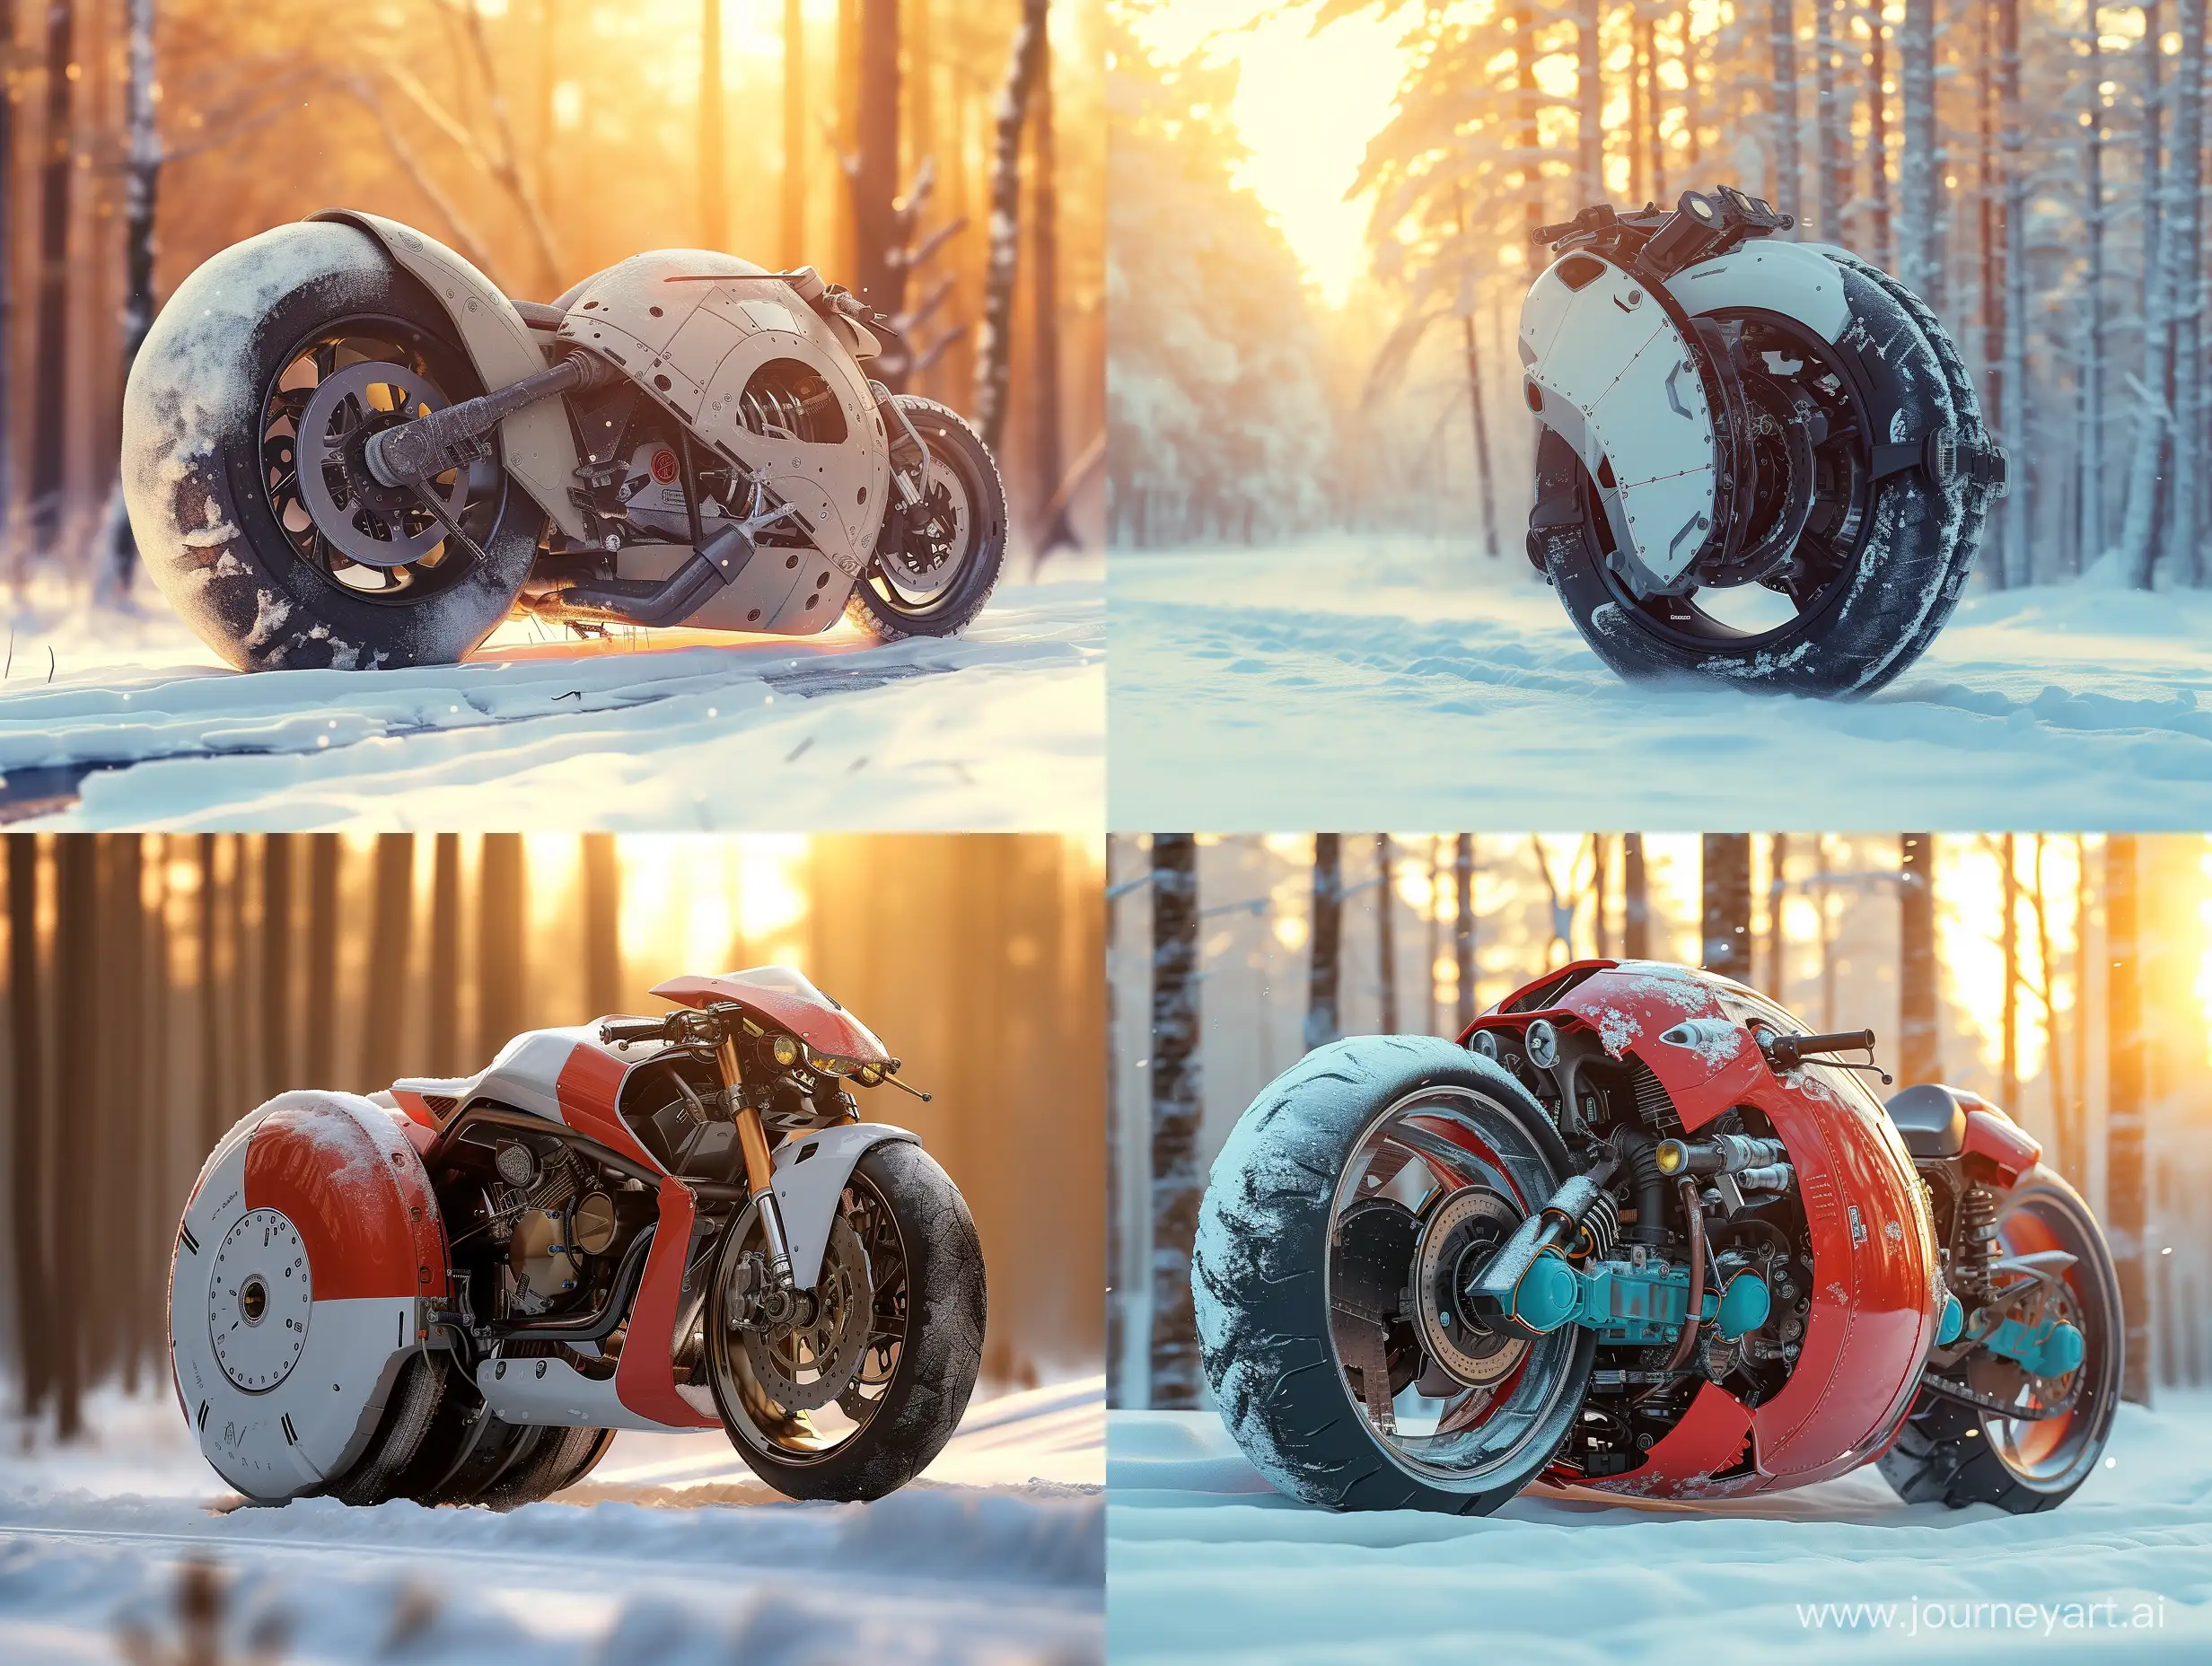 Offroad-Monowheel-Motorcycle-with-Jet-Engine-in-Snow